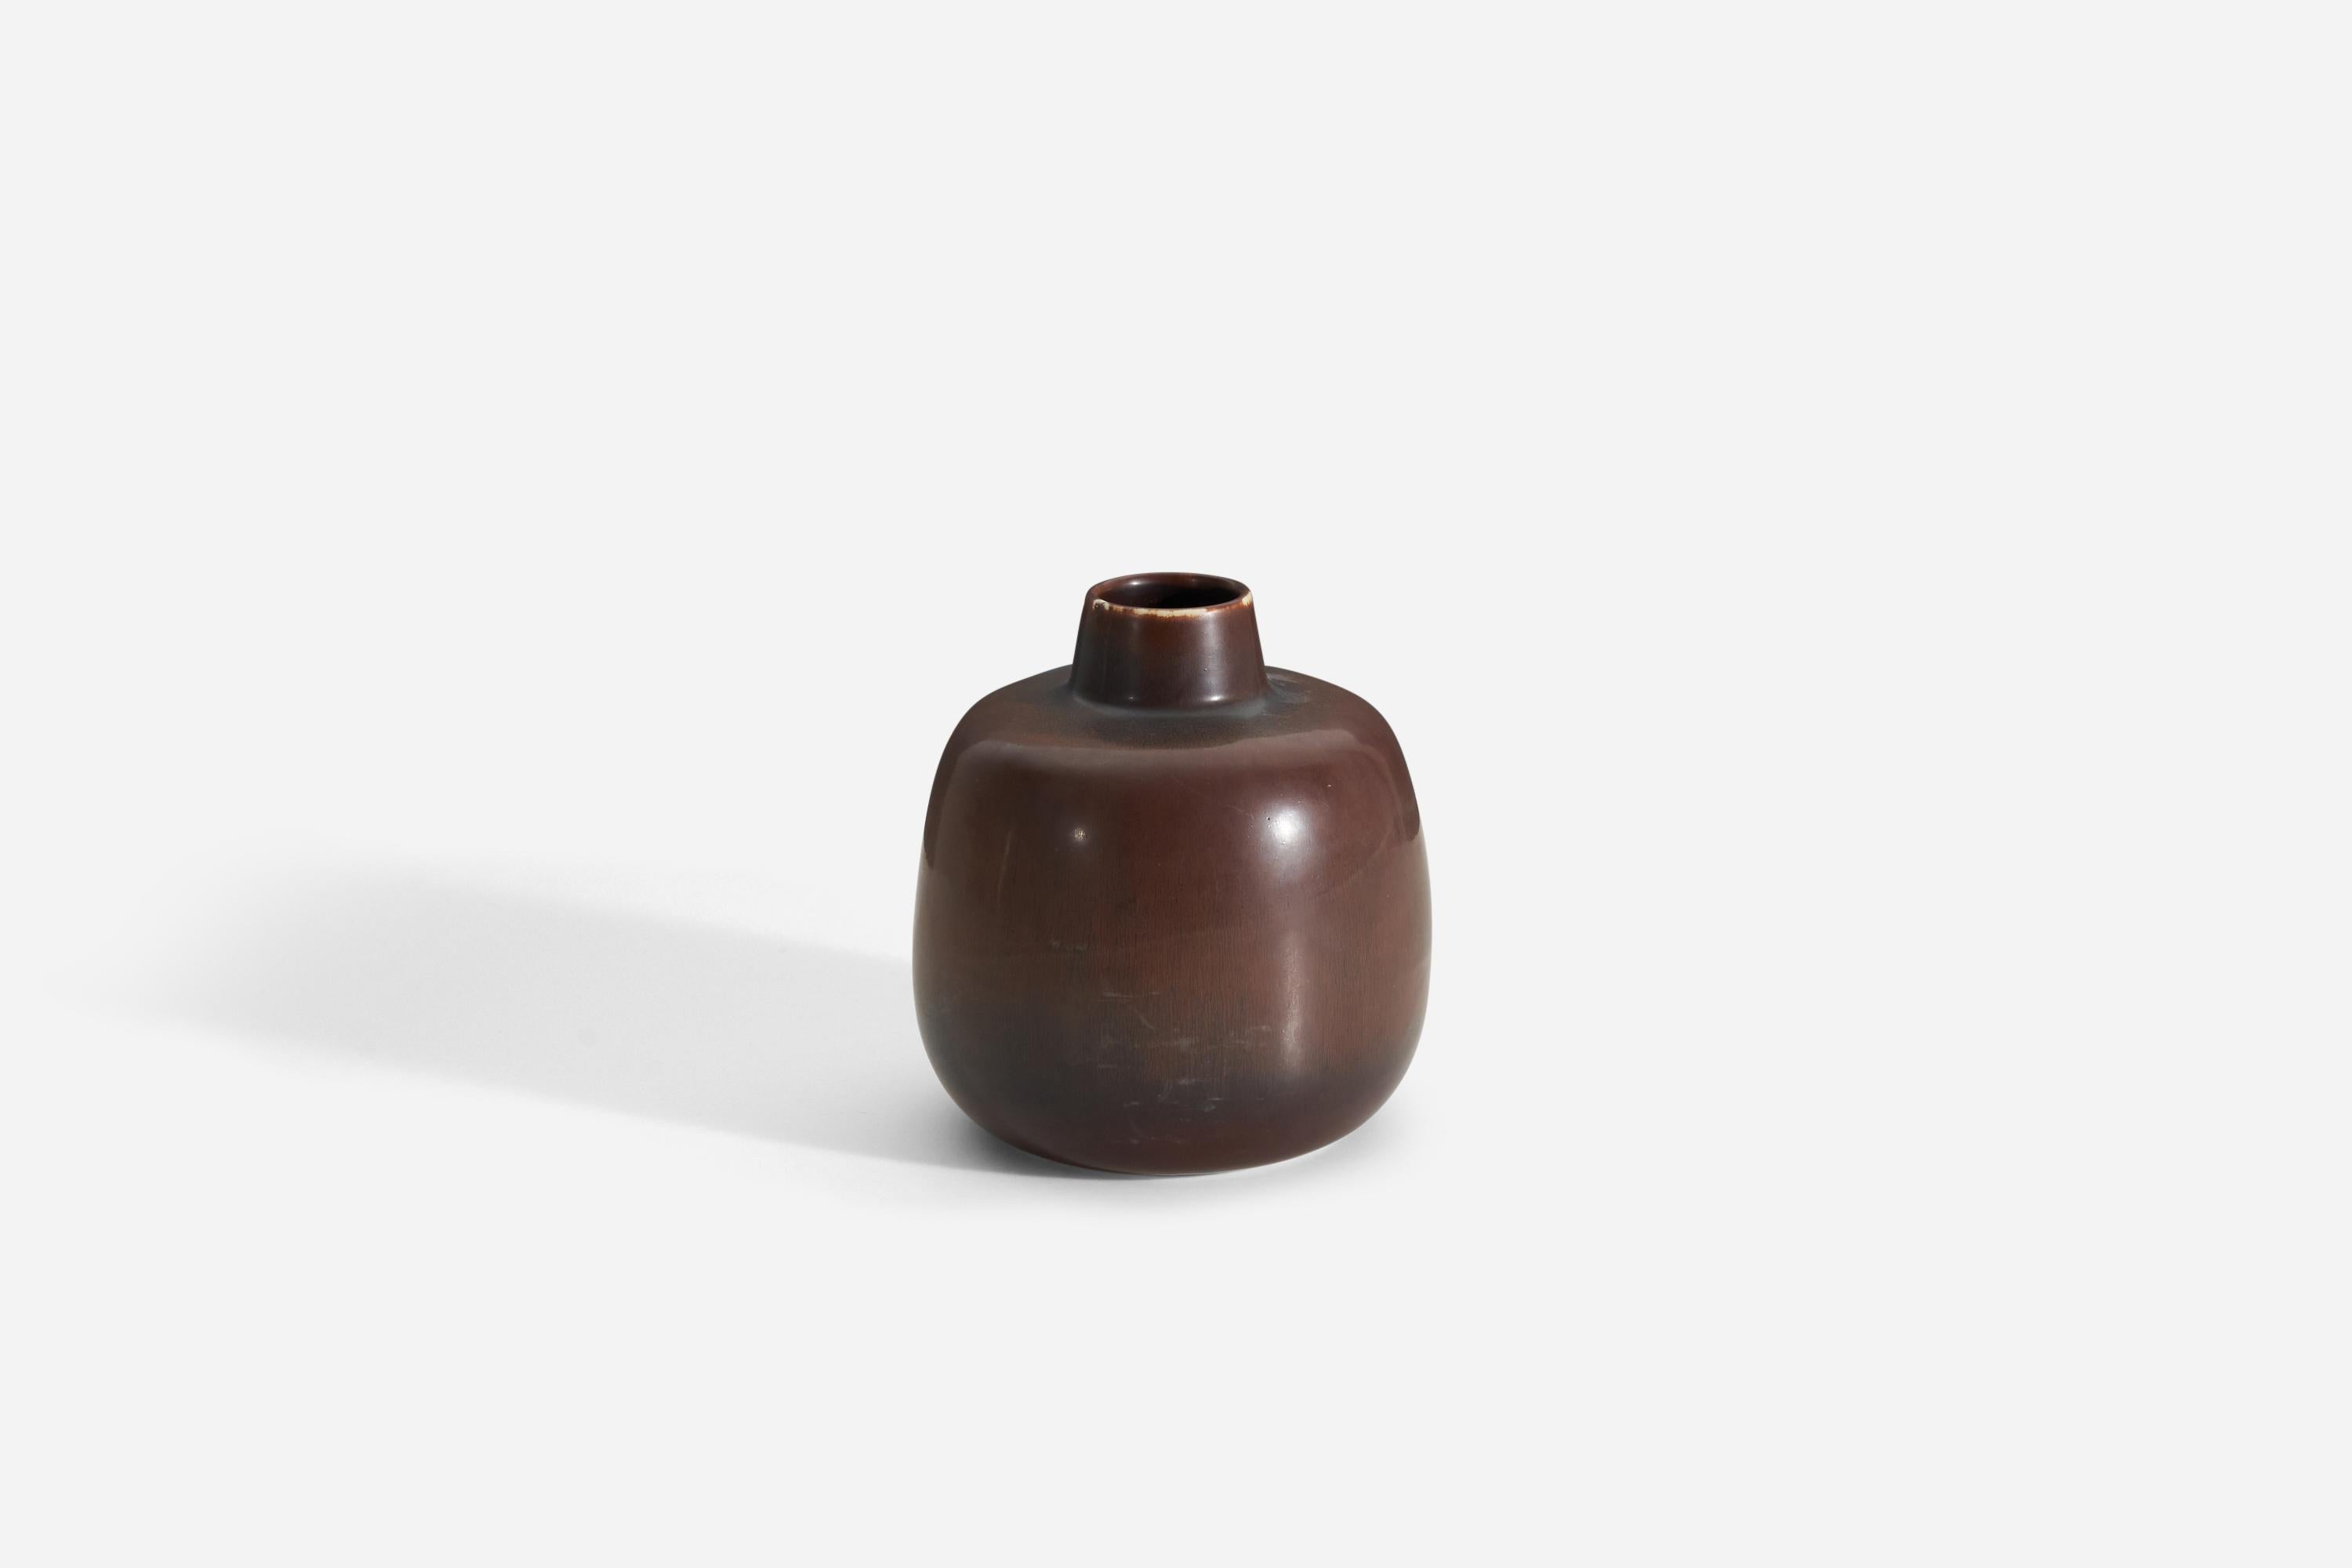 A vase by Carl-Harry Stålhane for Swedish firm Rörstrand, 1950s, Sweden. Marked and signed.

Other ceramicists of the period include Berndt Friberg, Axel Salto, Arne Bang and Wilhelm Kåge.